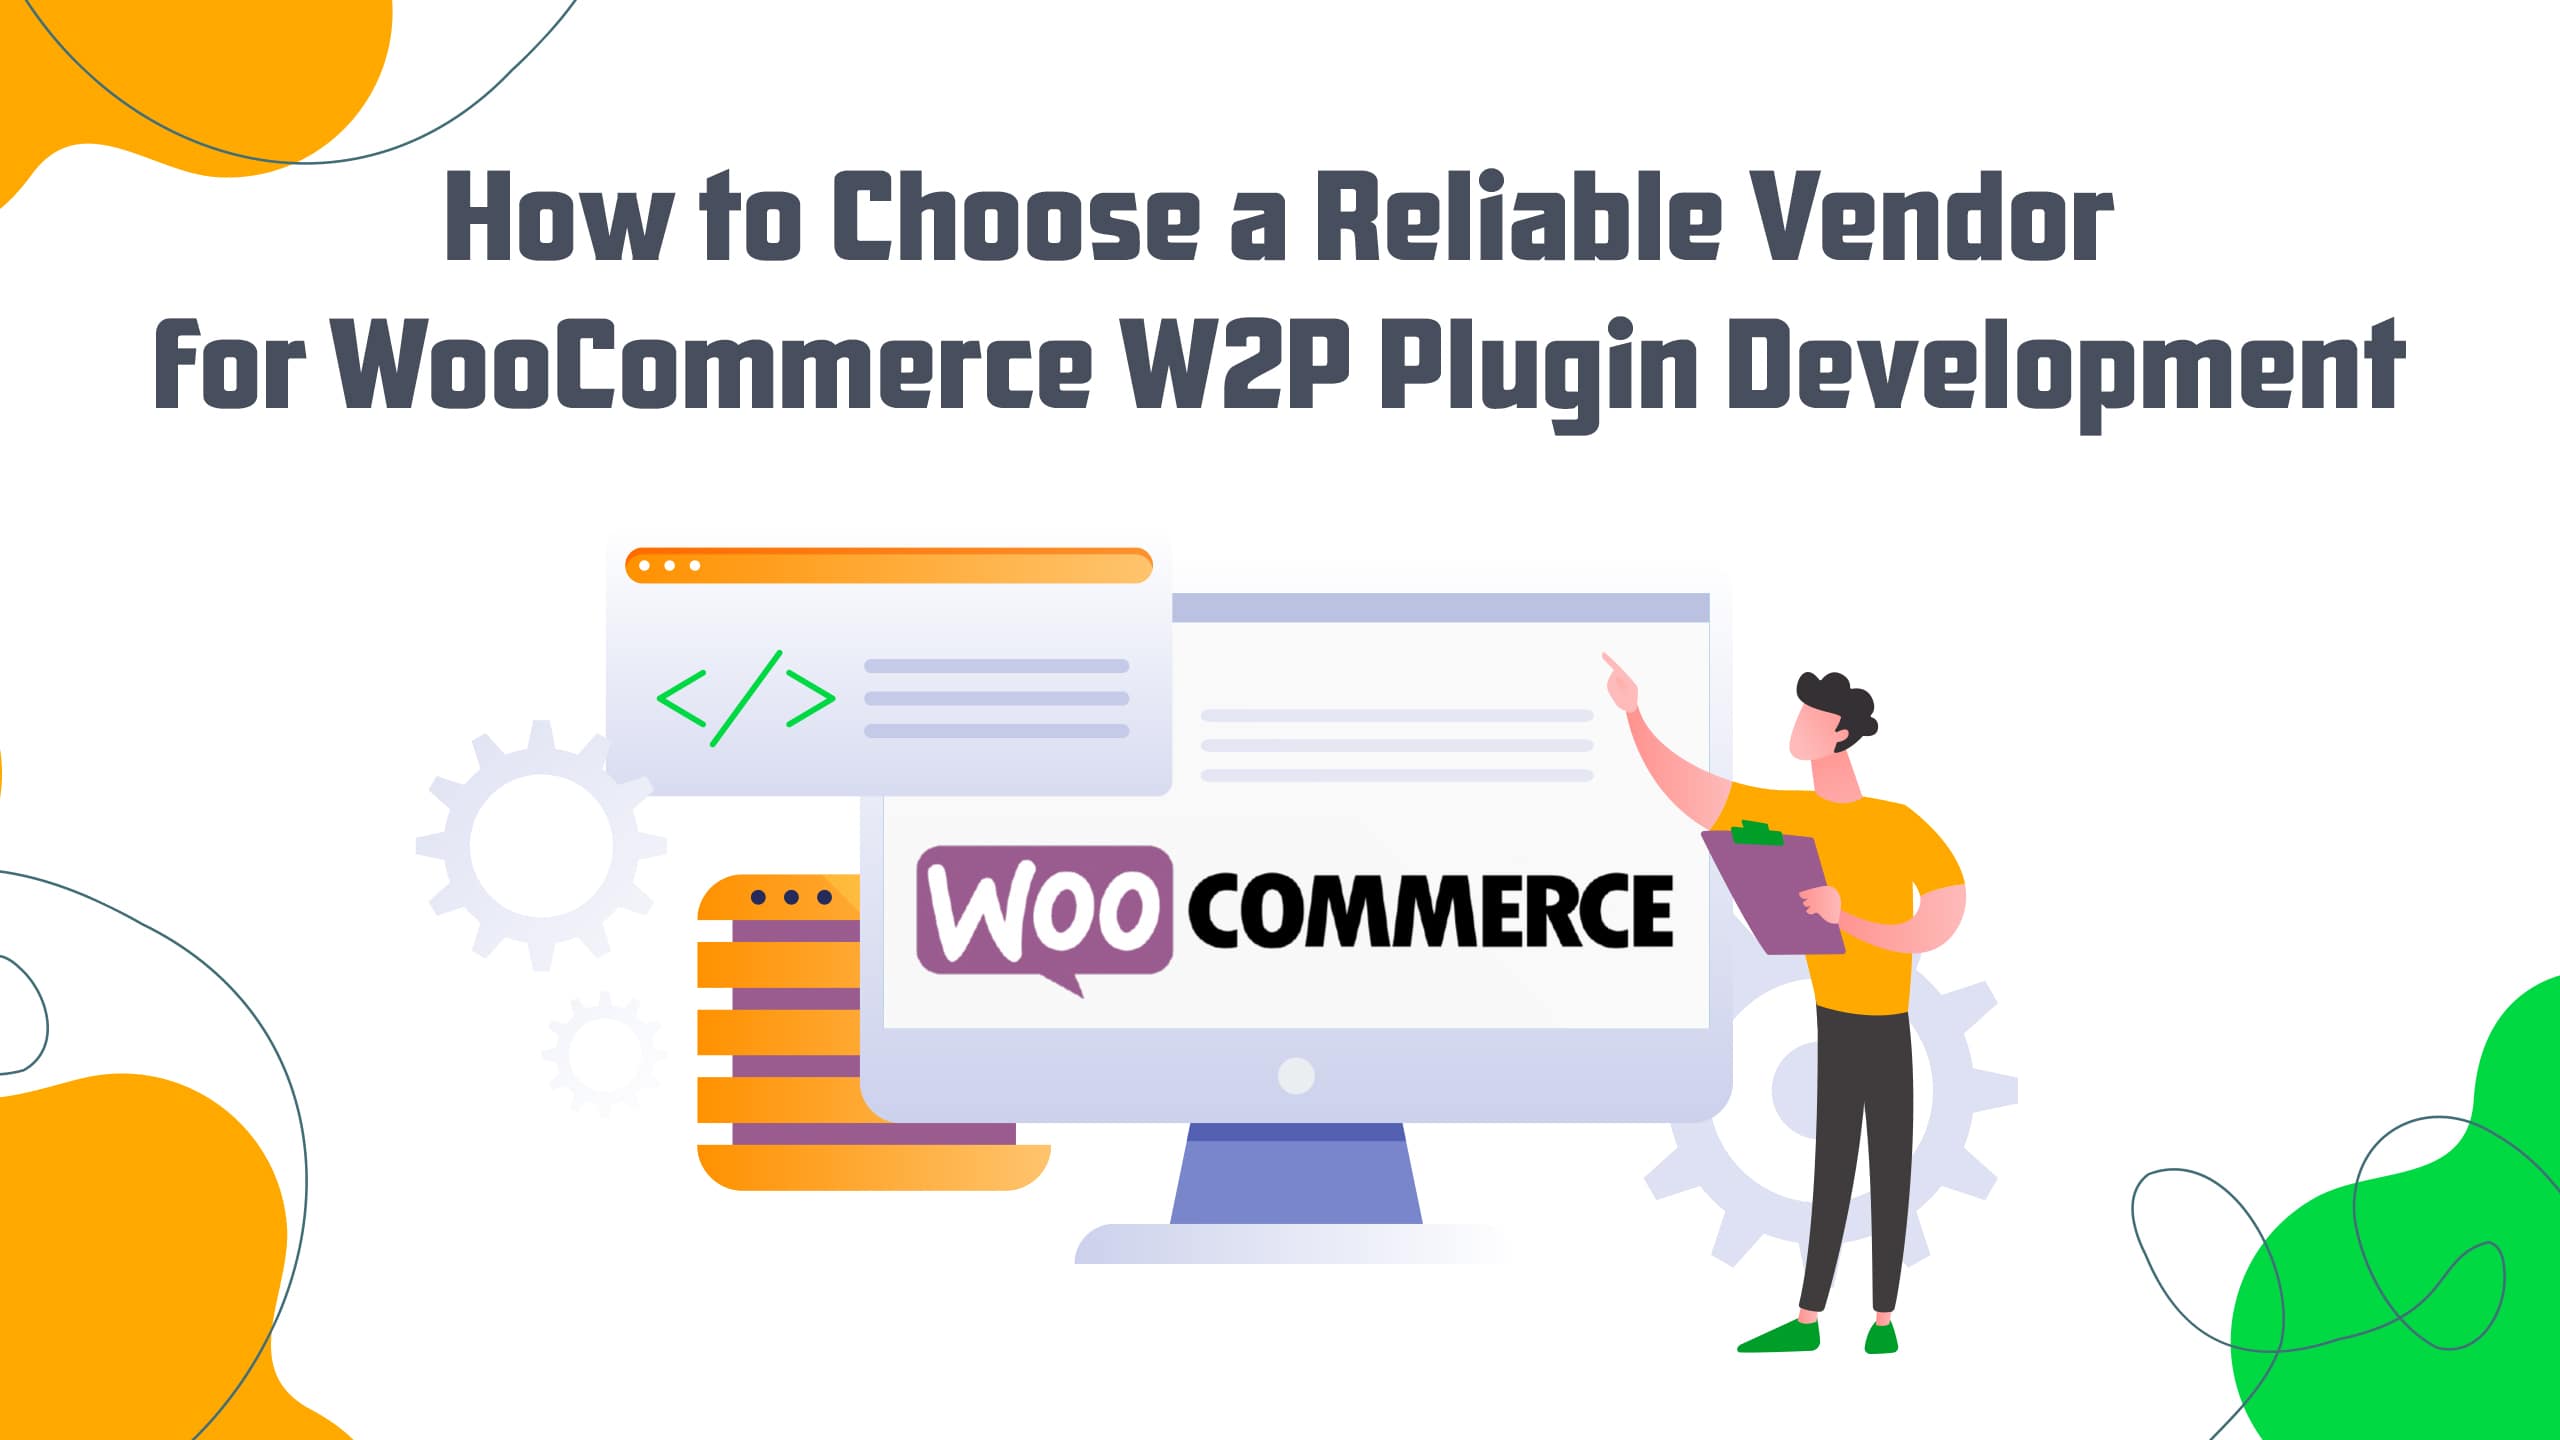 How to Choose a Reliable Vendor for WooCommerce W2P Plugin Development